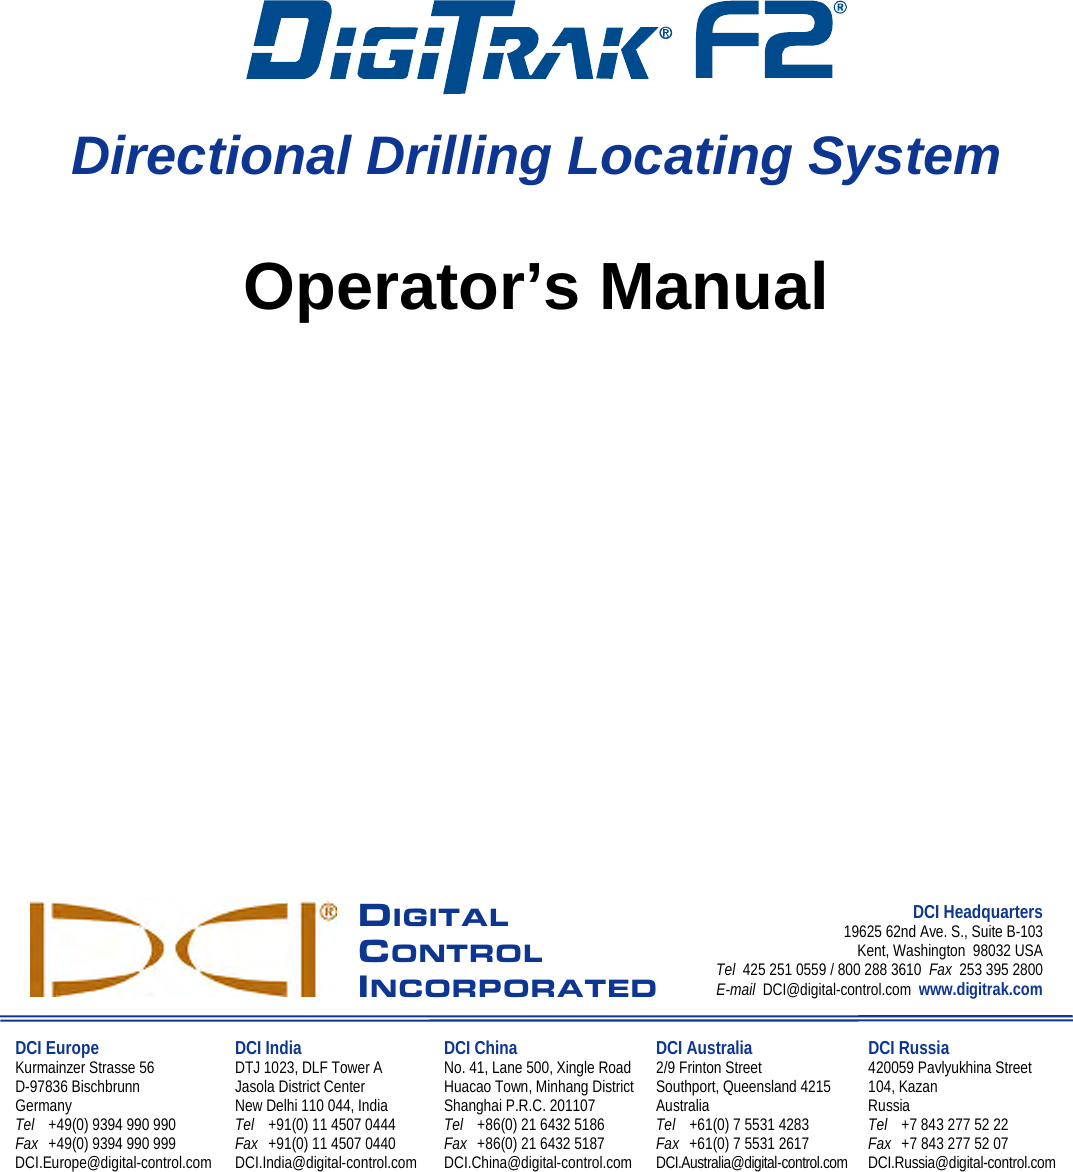                    Directional Drilling Locating System  Operator’s Manual                   DIGITAL CONTROL INCORPORATED DCI Headquarters 19625 62nd Ave. S., Suite B-103 Kent, Washington  98032 USA Tel  425 251 0559 / 800 288 3610  Fax  253 395 2800 E-mail  DCI@digital-control.com  www.digitrak.com  DCI Europe Kurmainzer Strasse 56 D-97836 Bischbrunn  Germany Tel +49(0) 9394 990 990 Fax +49(0) 9394 990 999 DCI.Europe@digital-control.com DCI India DTJ 1023, DLF Tower A Jasola District Center New Delhi 110 044, India Tel +91(0) 11 4507 0444 Fax +91(0) 11 4507 0440 DCI.India@digital-control.com DCI China No. 41, Lane 500, Xingle Road Huacao Town, Minhang District Shanghai P.R.C. 201107  Tel +86(0) 21 6432 5186 Fax +86(0) 21 6432 5187 DCI.China@digital-control.com DCI Australia 2/9 Frinton Street Southport, Queensland 4215 Australia Tel +61(0) 7 5531 4283 Fax +61(0) 7 5531 2617 DCI.Australia@digital-control.com DCI Russia 420059 Pavlyukhina Street  104, Kazan Russia Tel +7 843 277 52 22 Fax +7 843 277 52 07 DCI.Russia@digital-control.com      